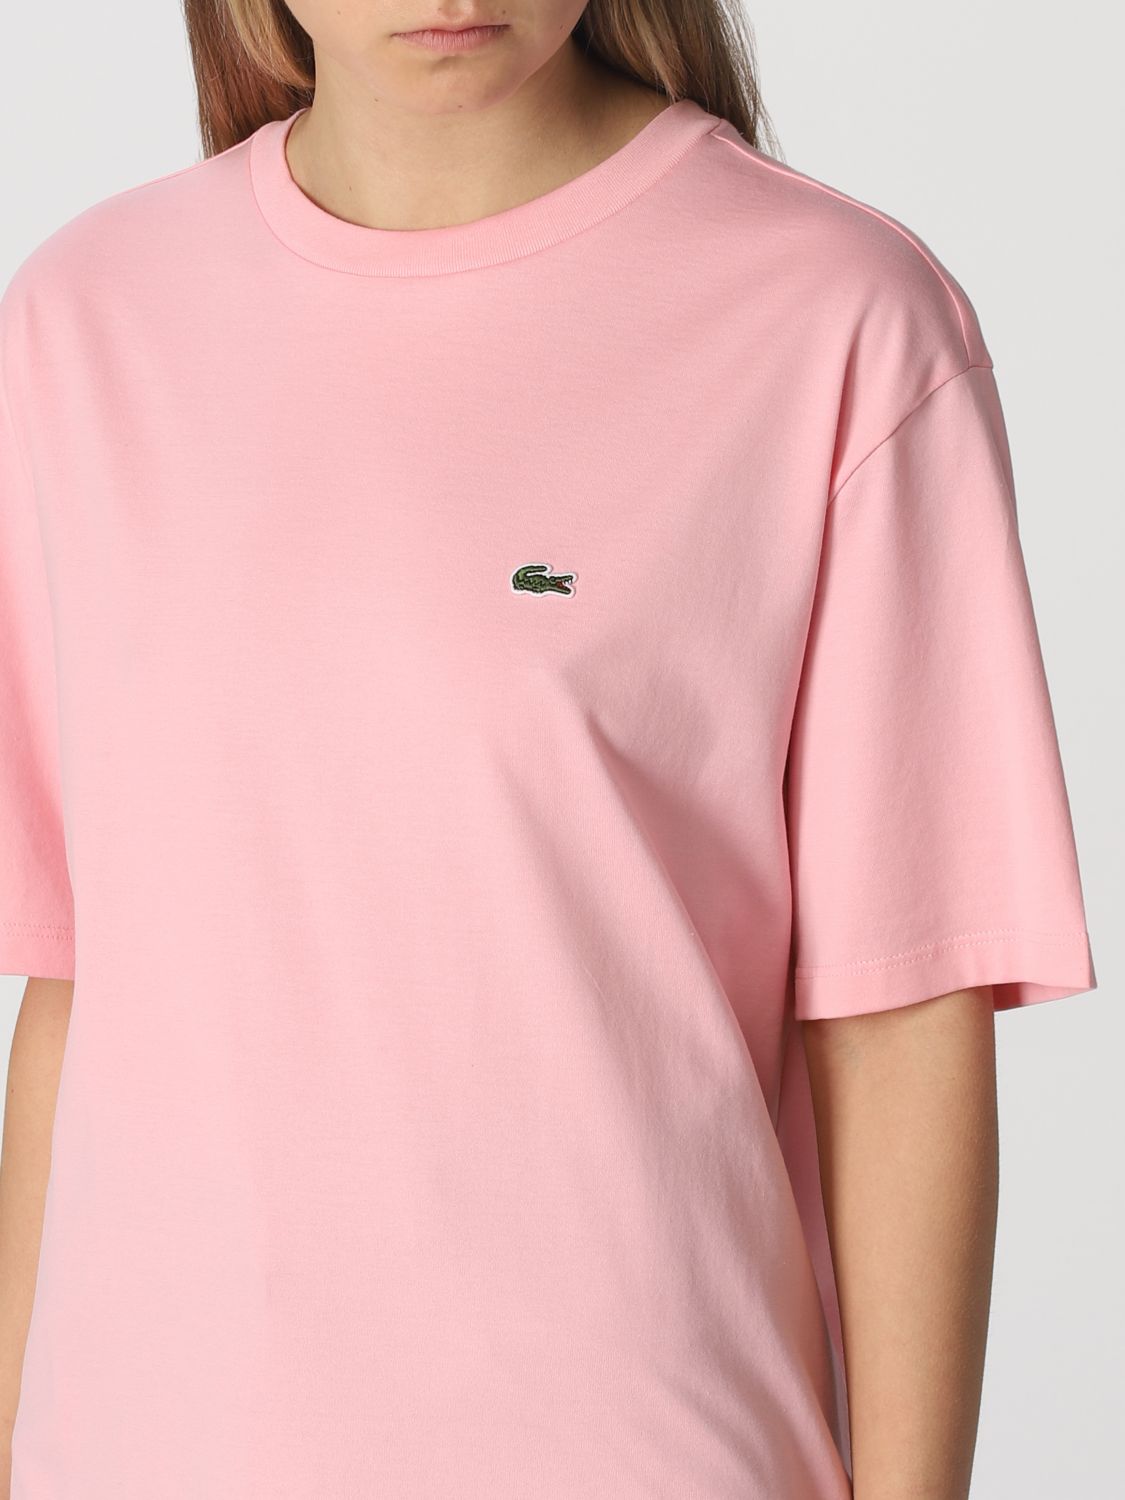 LACOSTE: T-shirt with patch - Pink | Lacoste t-shirt TF5441 at GIGLIO.COM